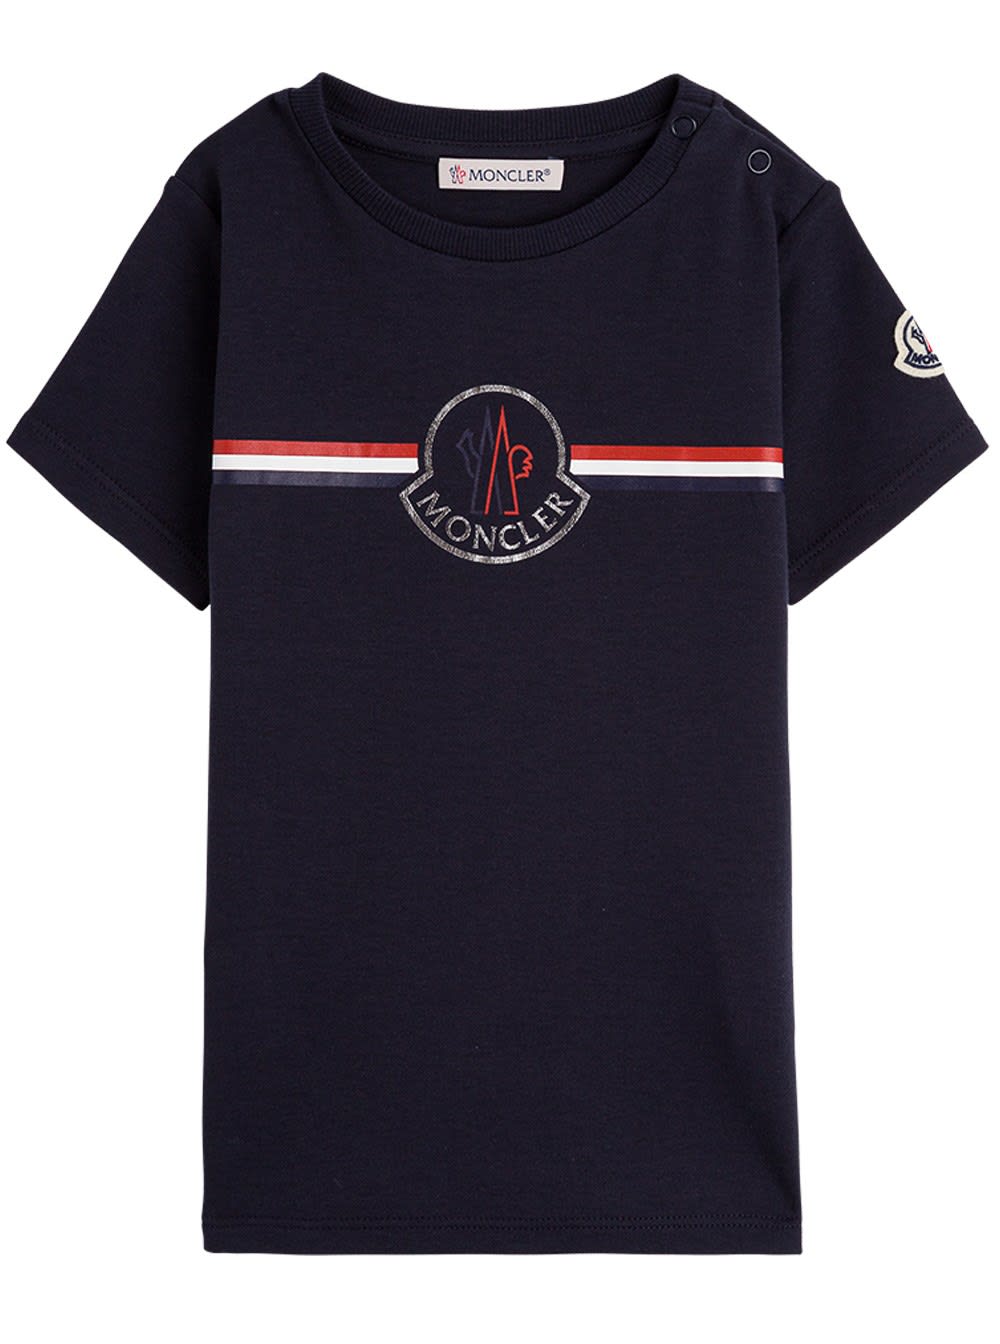 MONCLER JERSEY T-SHIRT WITH FRONT LOGO PRINT,8C71700 8392E742